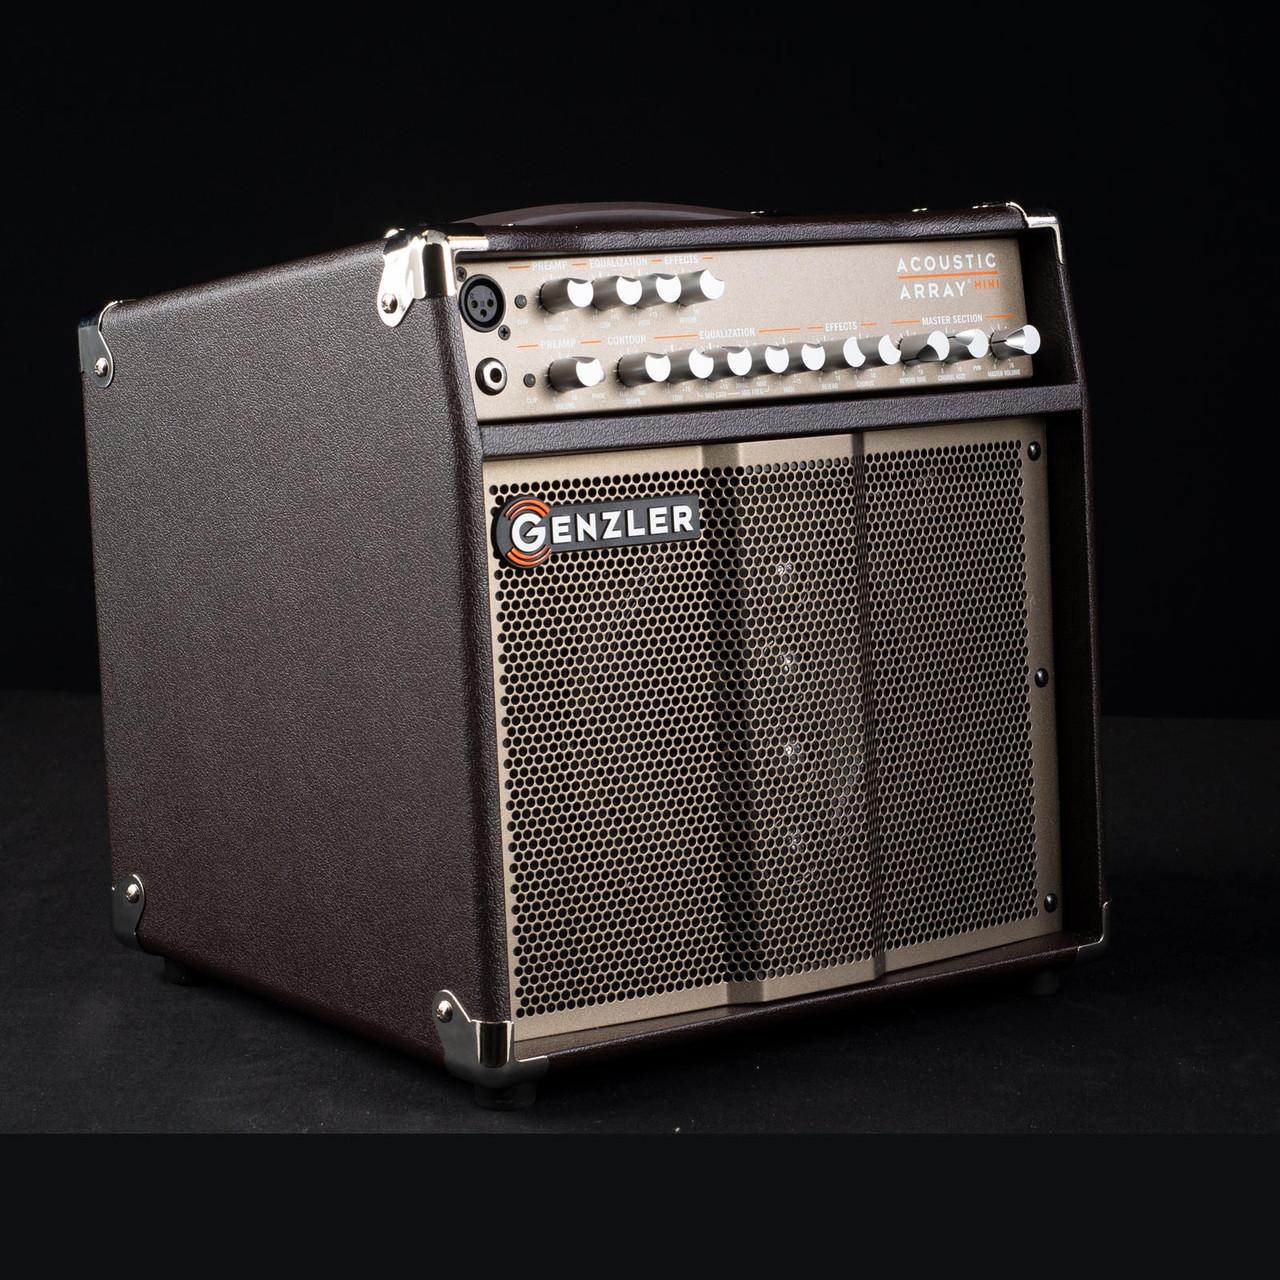 Genzler Amplification Acoustic Array Mini 100w 0010 at Moore Guitars